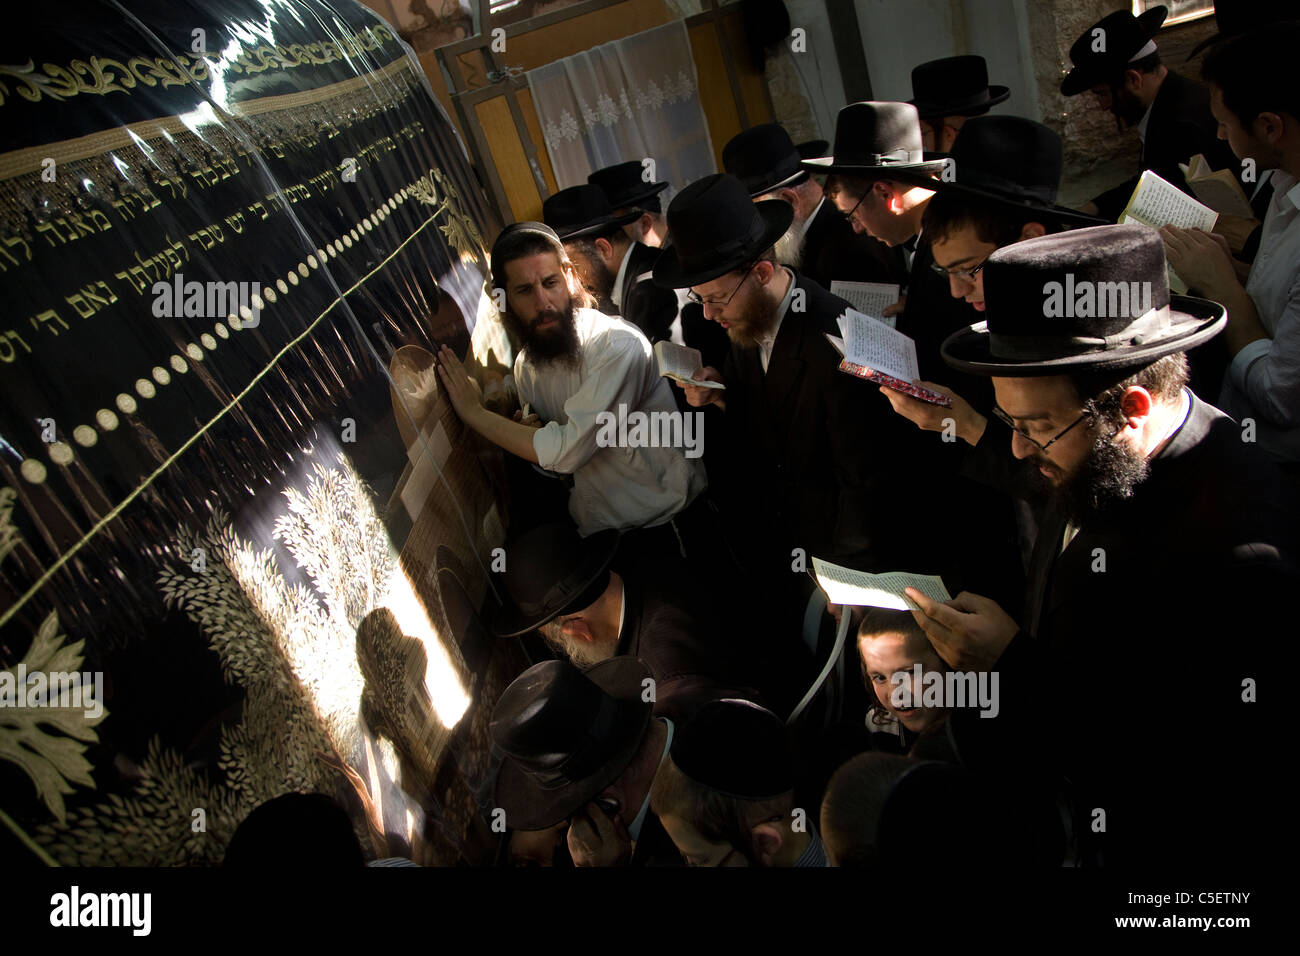 Ultra Orthodox Jewish men pray during 17 Tamuz fast day inside the biblical Tomb of Rachel, Judaism's third holiest shrine, in the West Bank town of Bethlehem on 19 July 2011. The Seventeenth of Tammuz is a fast day of mourning to remember the many tragedies that have befallen the Jewish people over the centuries. Stock Photo